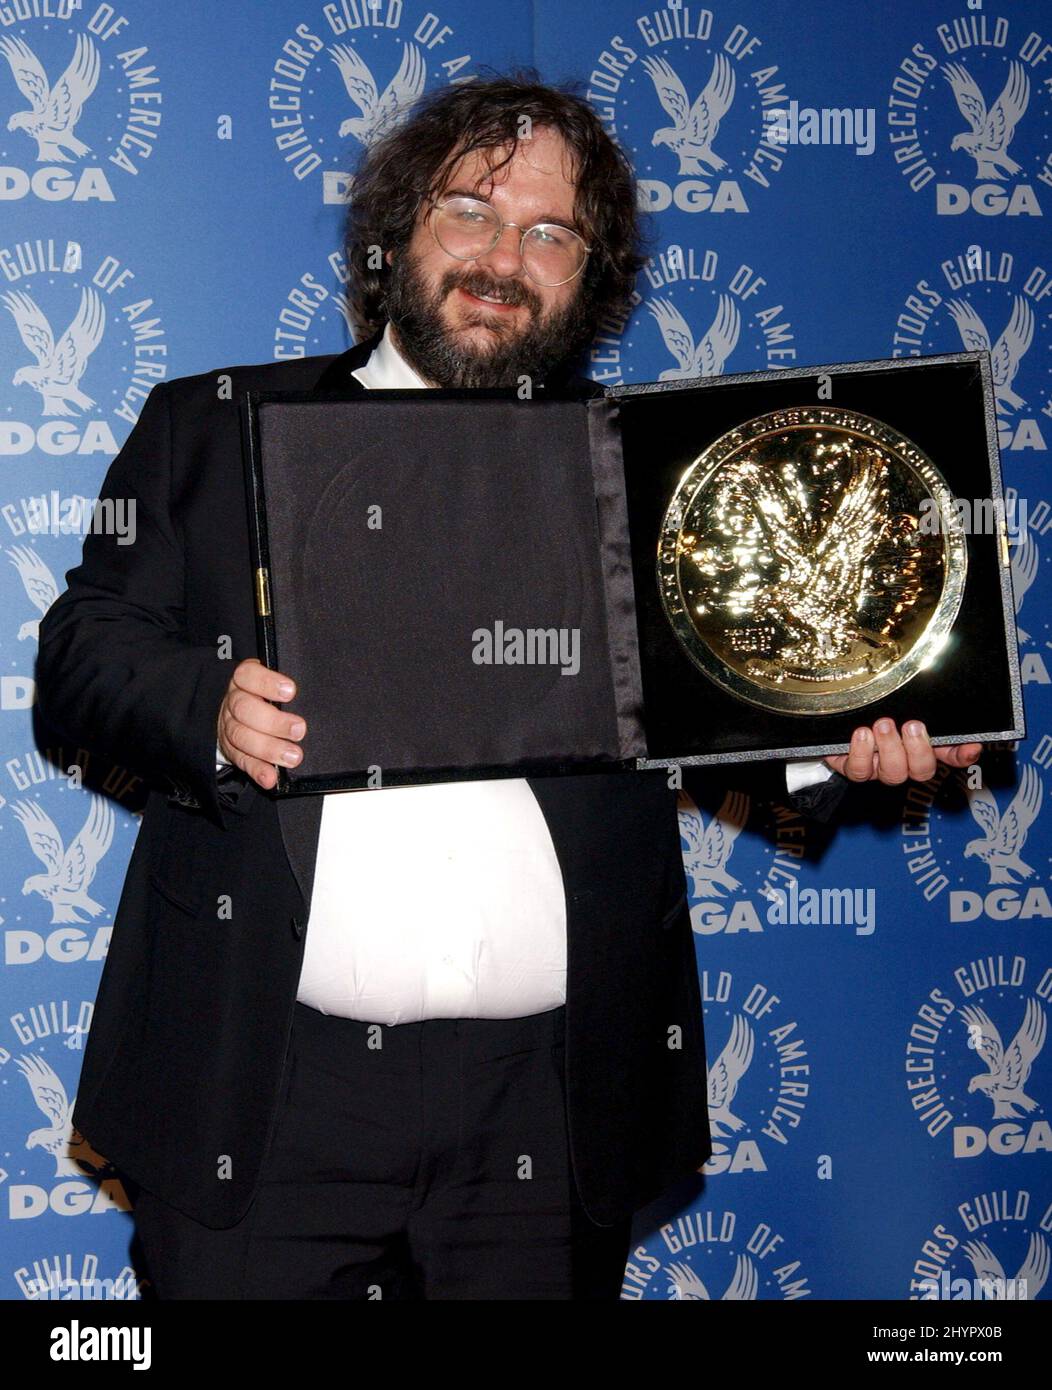 PETER JACKSON ATTENDS 'THE 56th ANNUAL DIRECTOR'S GUILD AWARDS' IN CALIFORNIA. PICTURE: UK PRESS Stock Photo